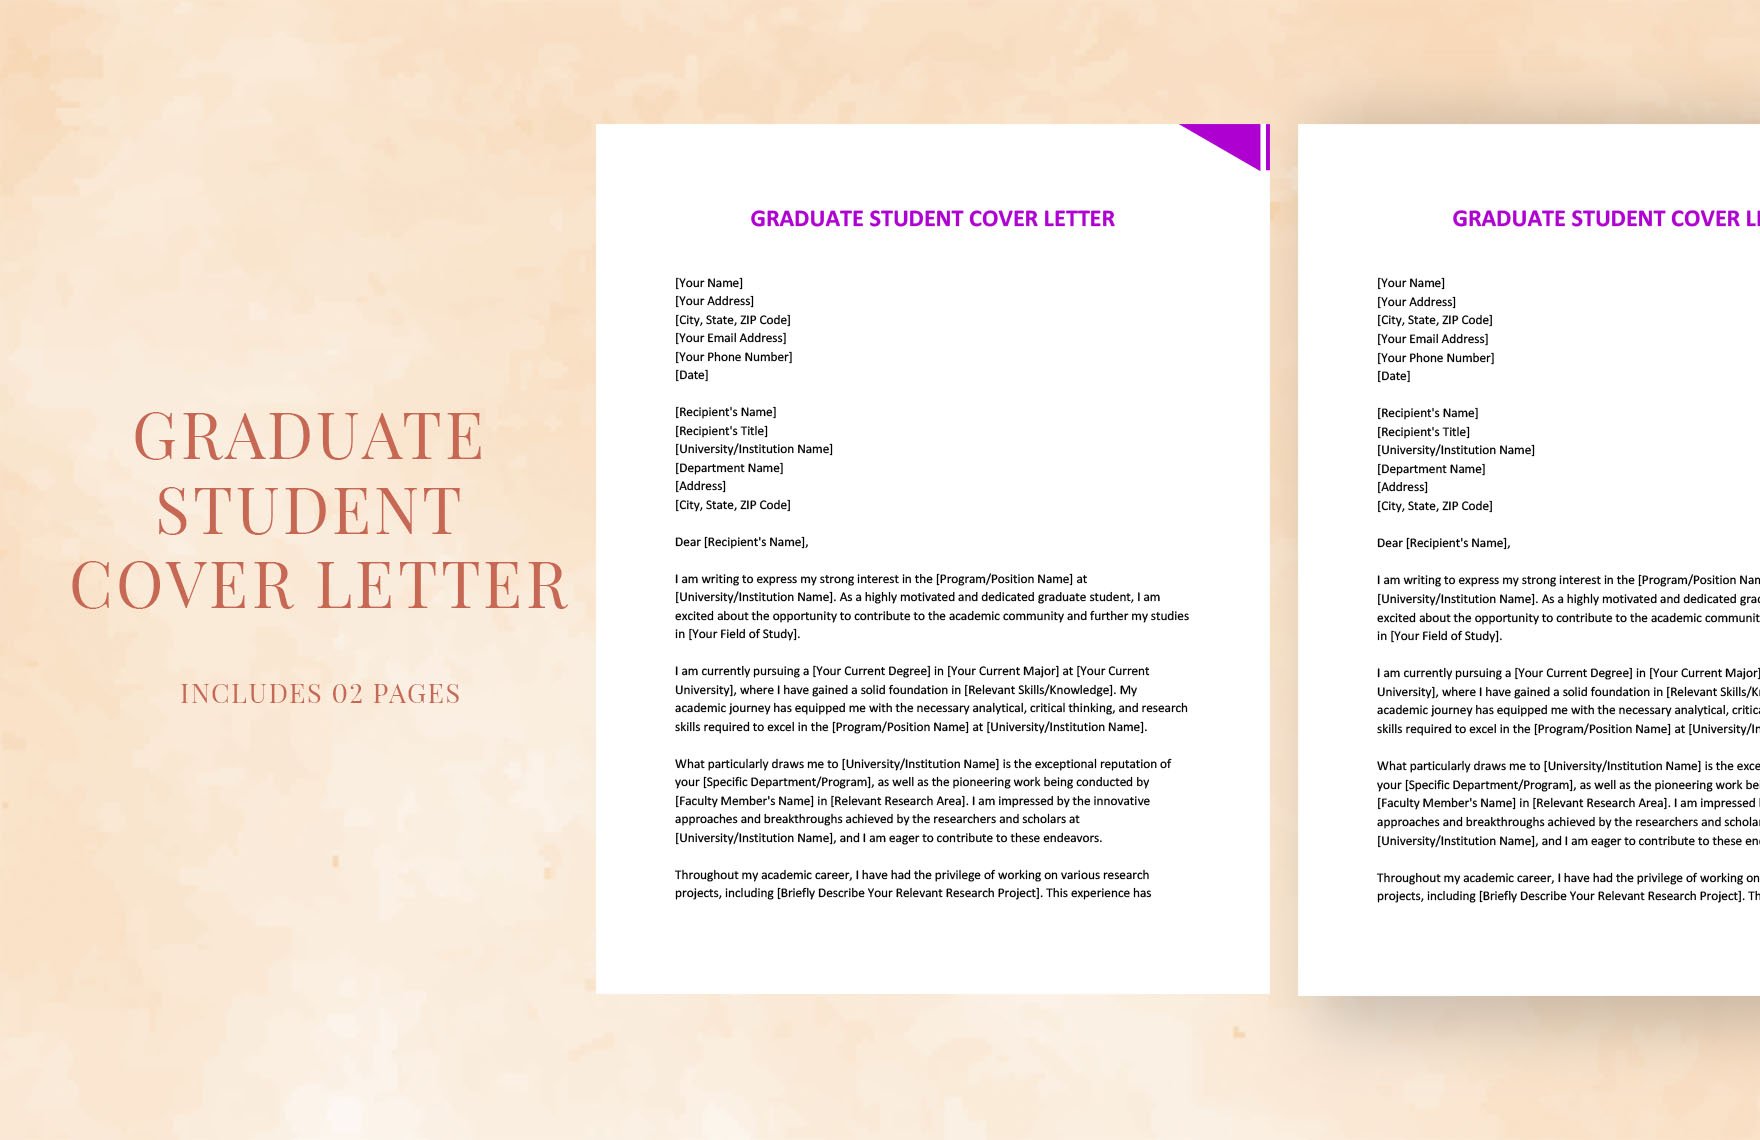 Graduate Student Cover Letter in Word, Google Docs